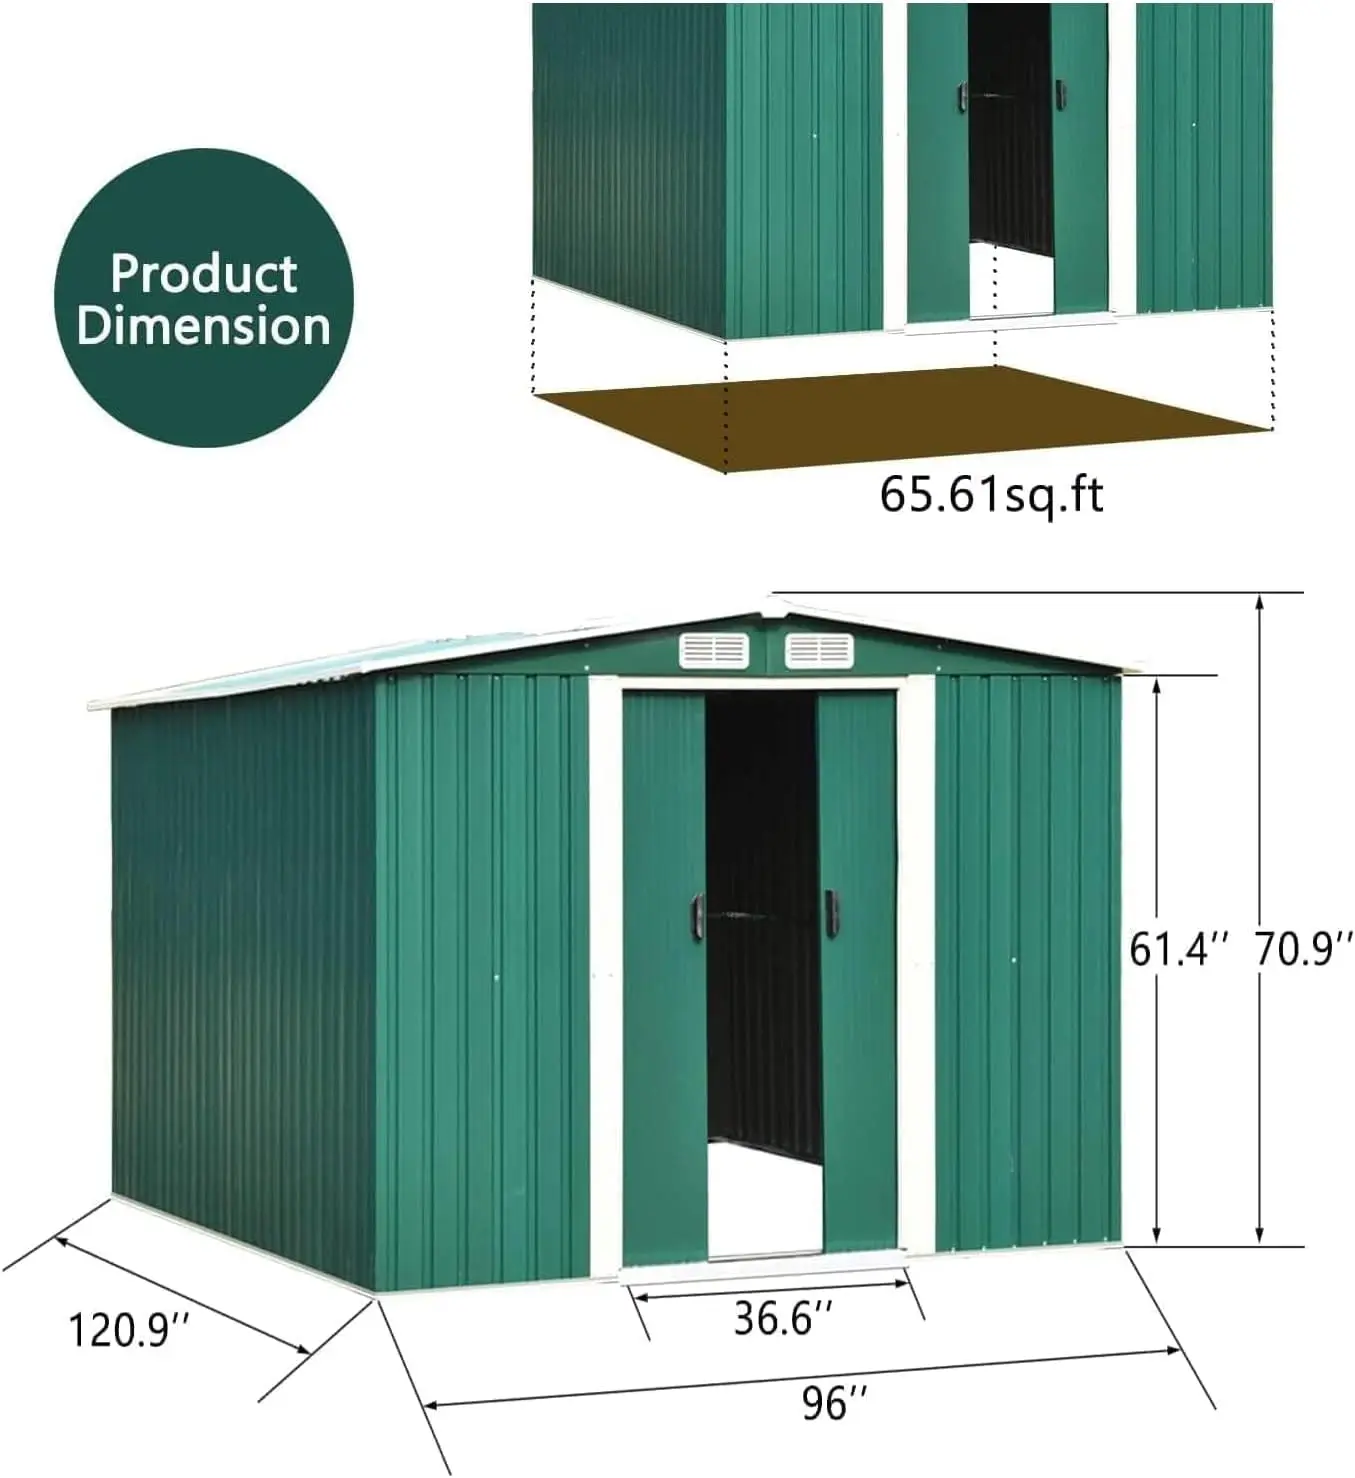 4x6/4x8/8x10FT Outdoor Metal Shed w/ Doors & Vents,Tool Storage Sheds for Outdoor Patios,Garden,Lawn, Brown/Gray/Green images - 6